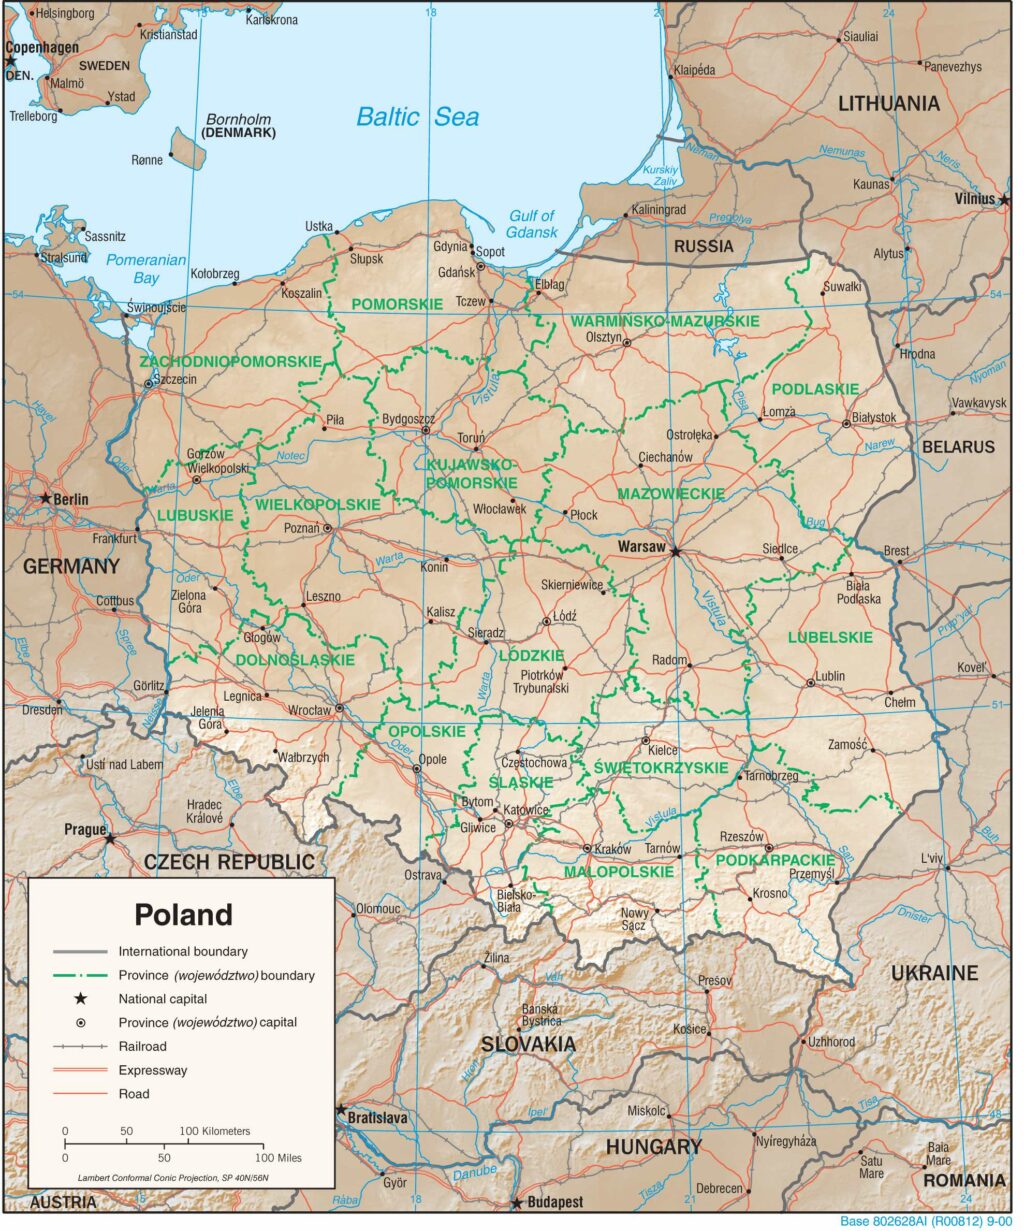 Poland physiography map.